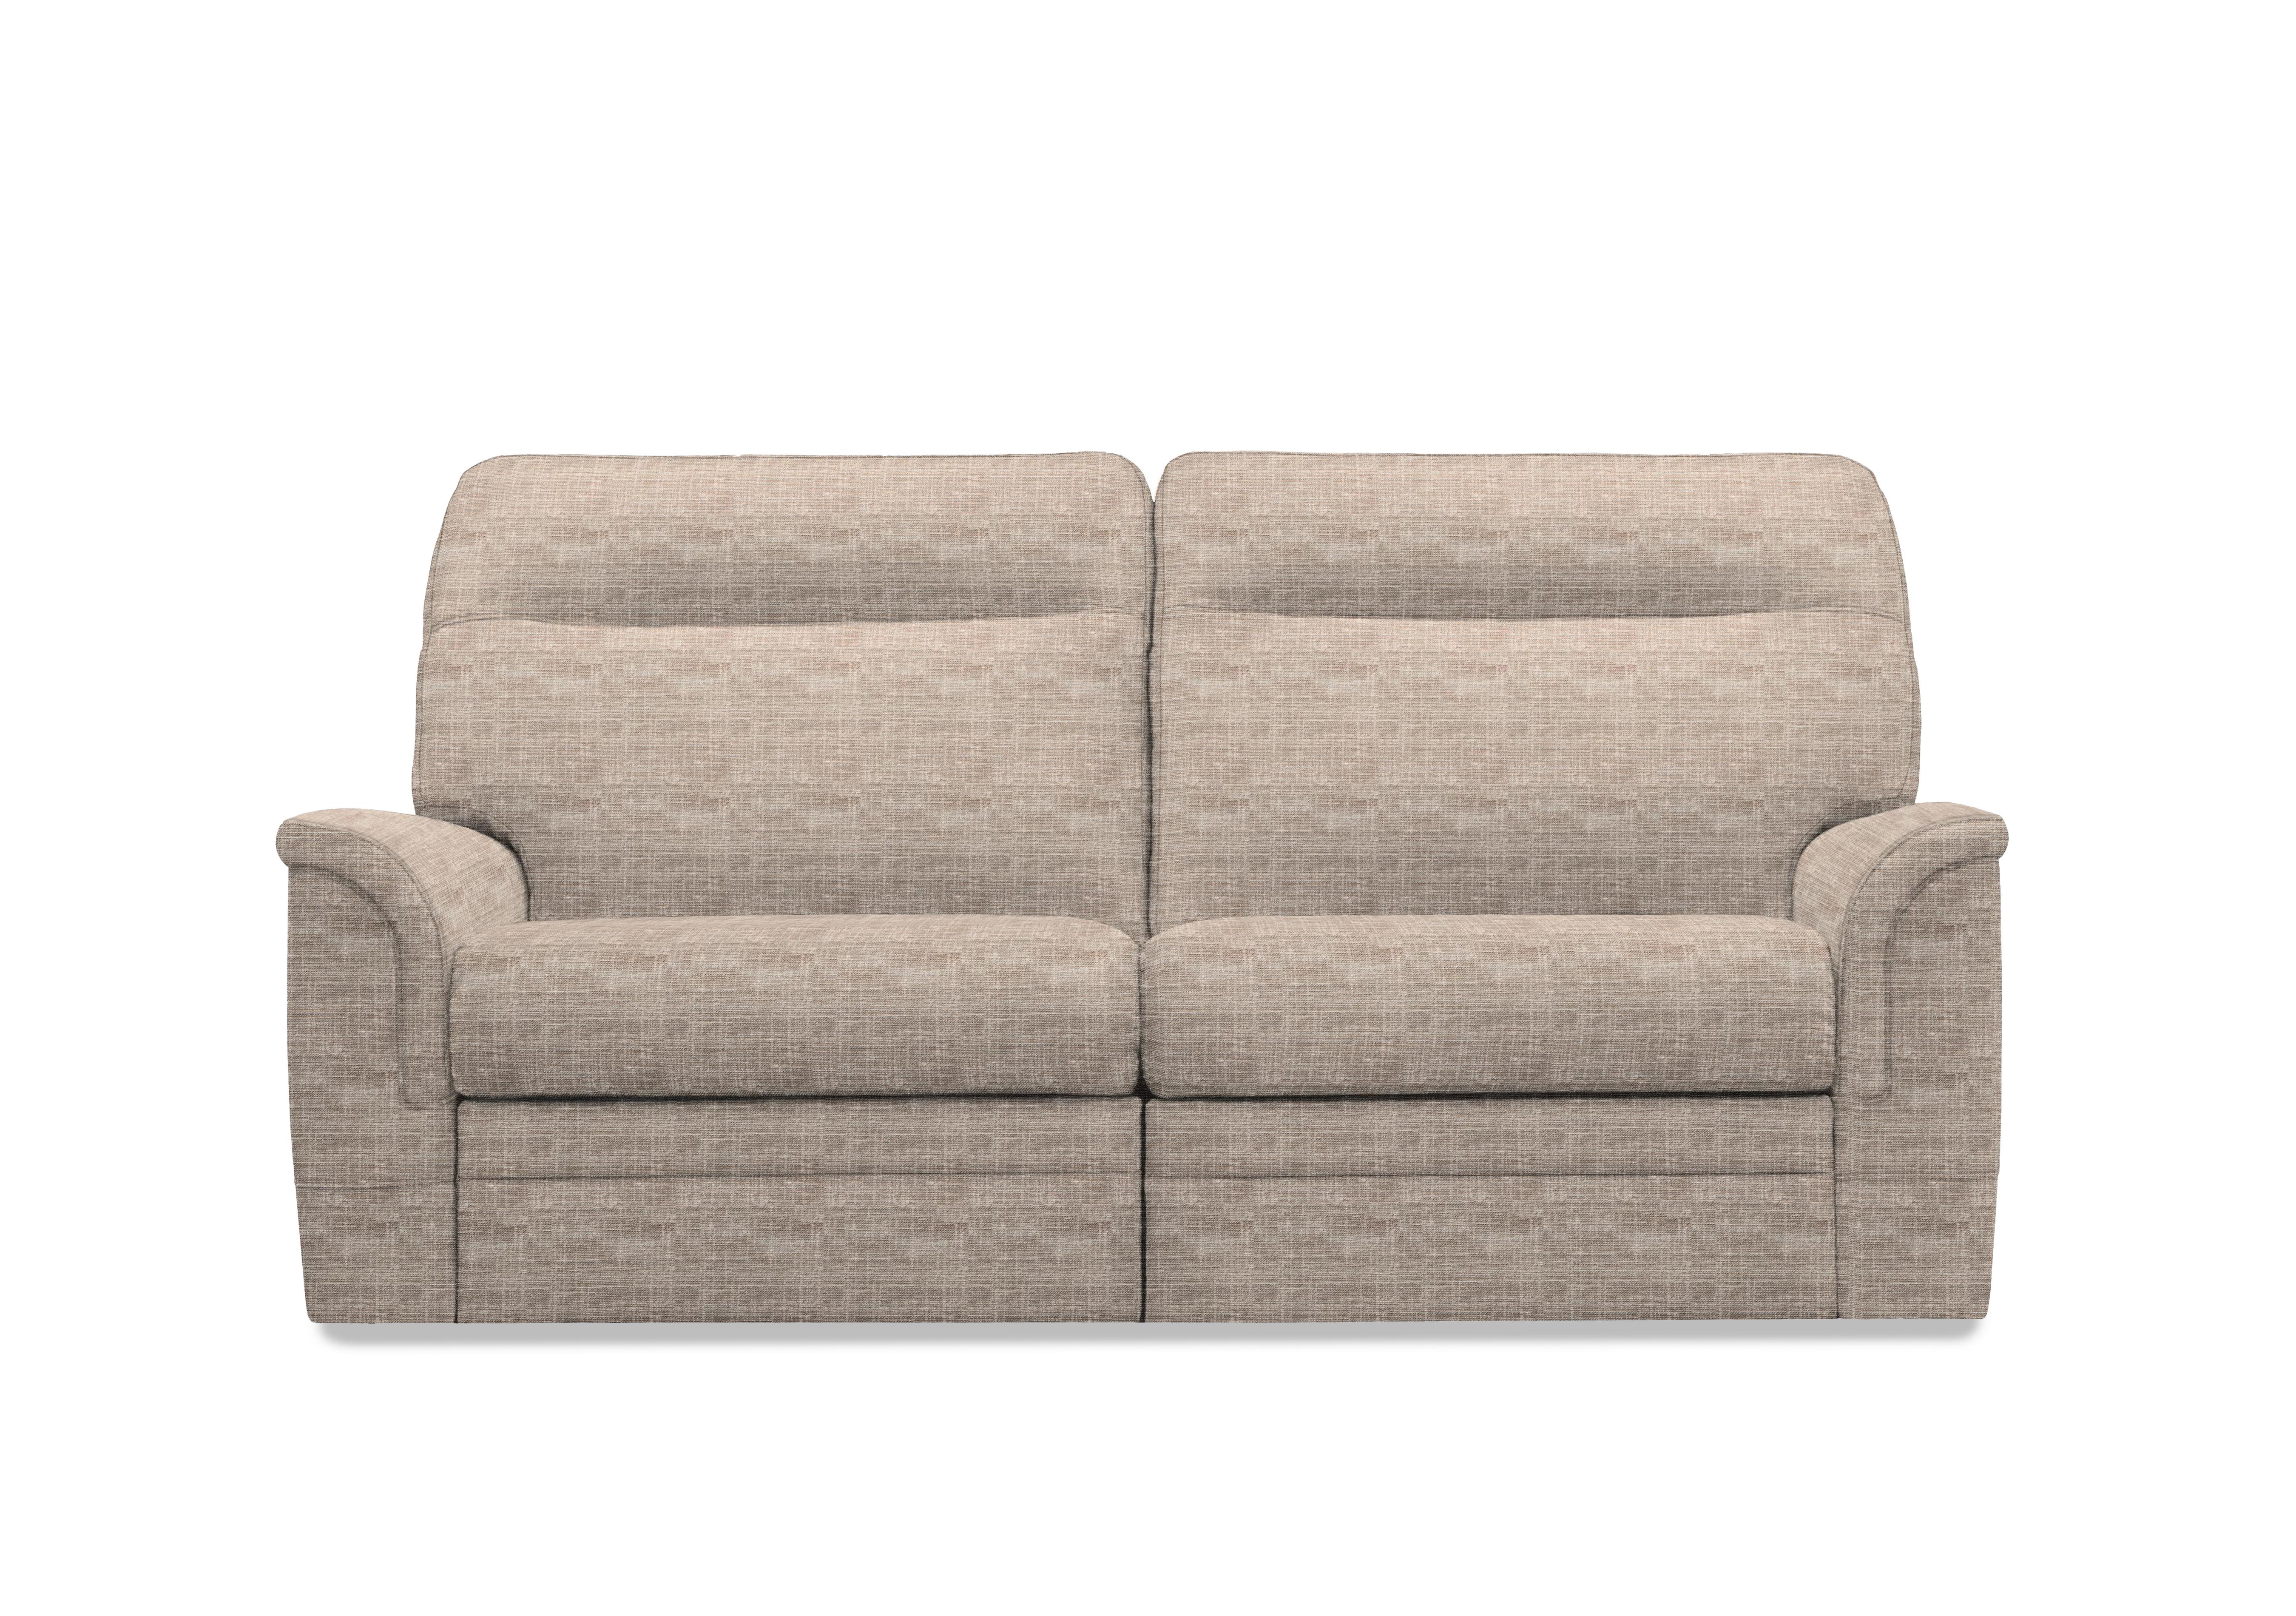 Hudson 23 Large 2 Seater Fabric Power Recliner Sofa with Power Headrests and Power Lumbar in Dash Oatmeal 001497-0051 on Furniture Village